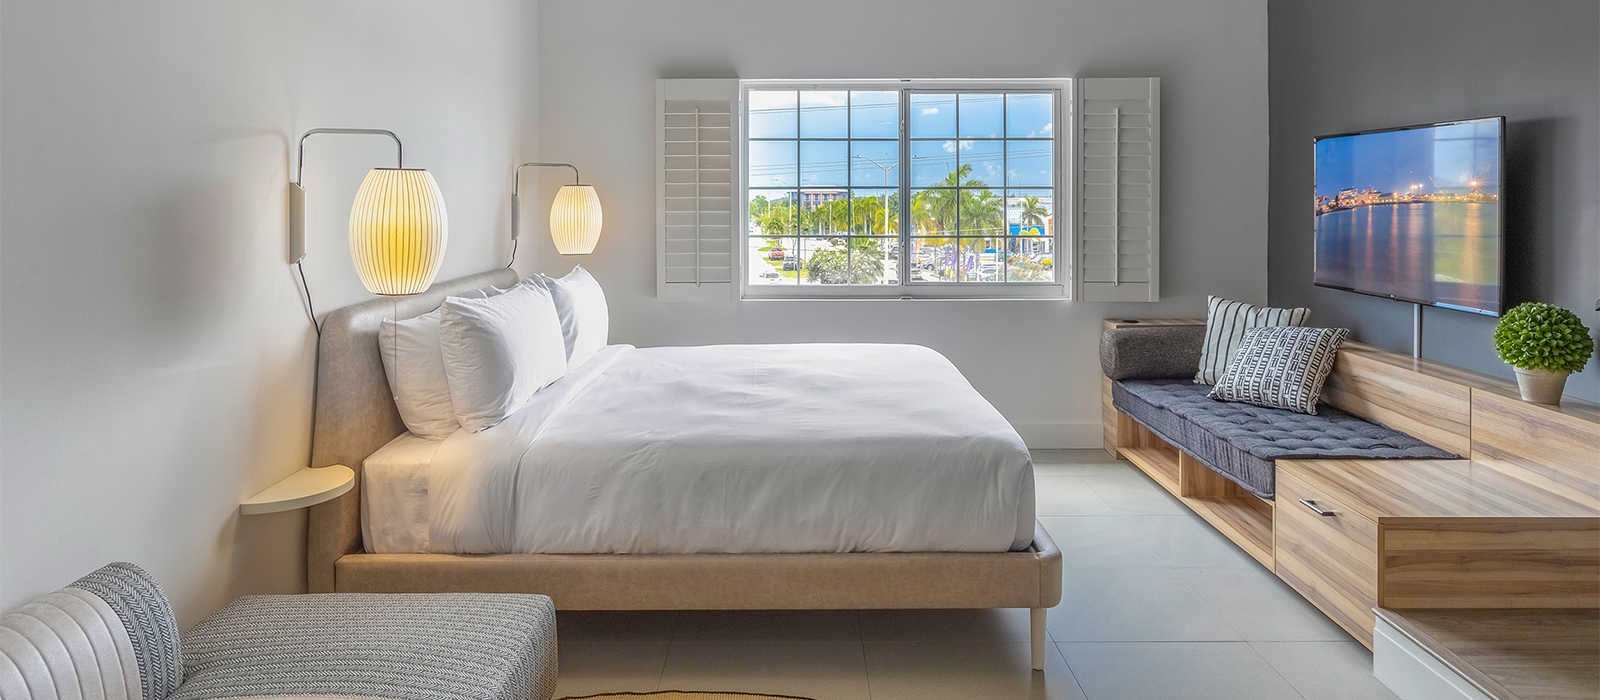 Locale Hotel Grand Cayman Penthouse Suite for a Black Couples' Trip